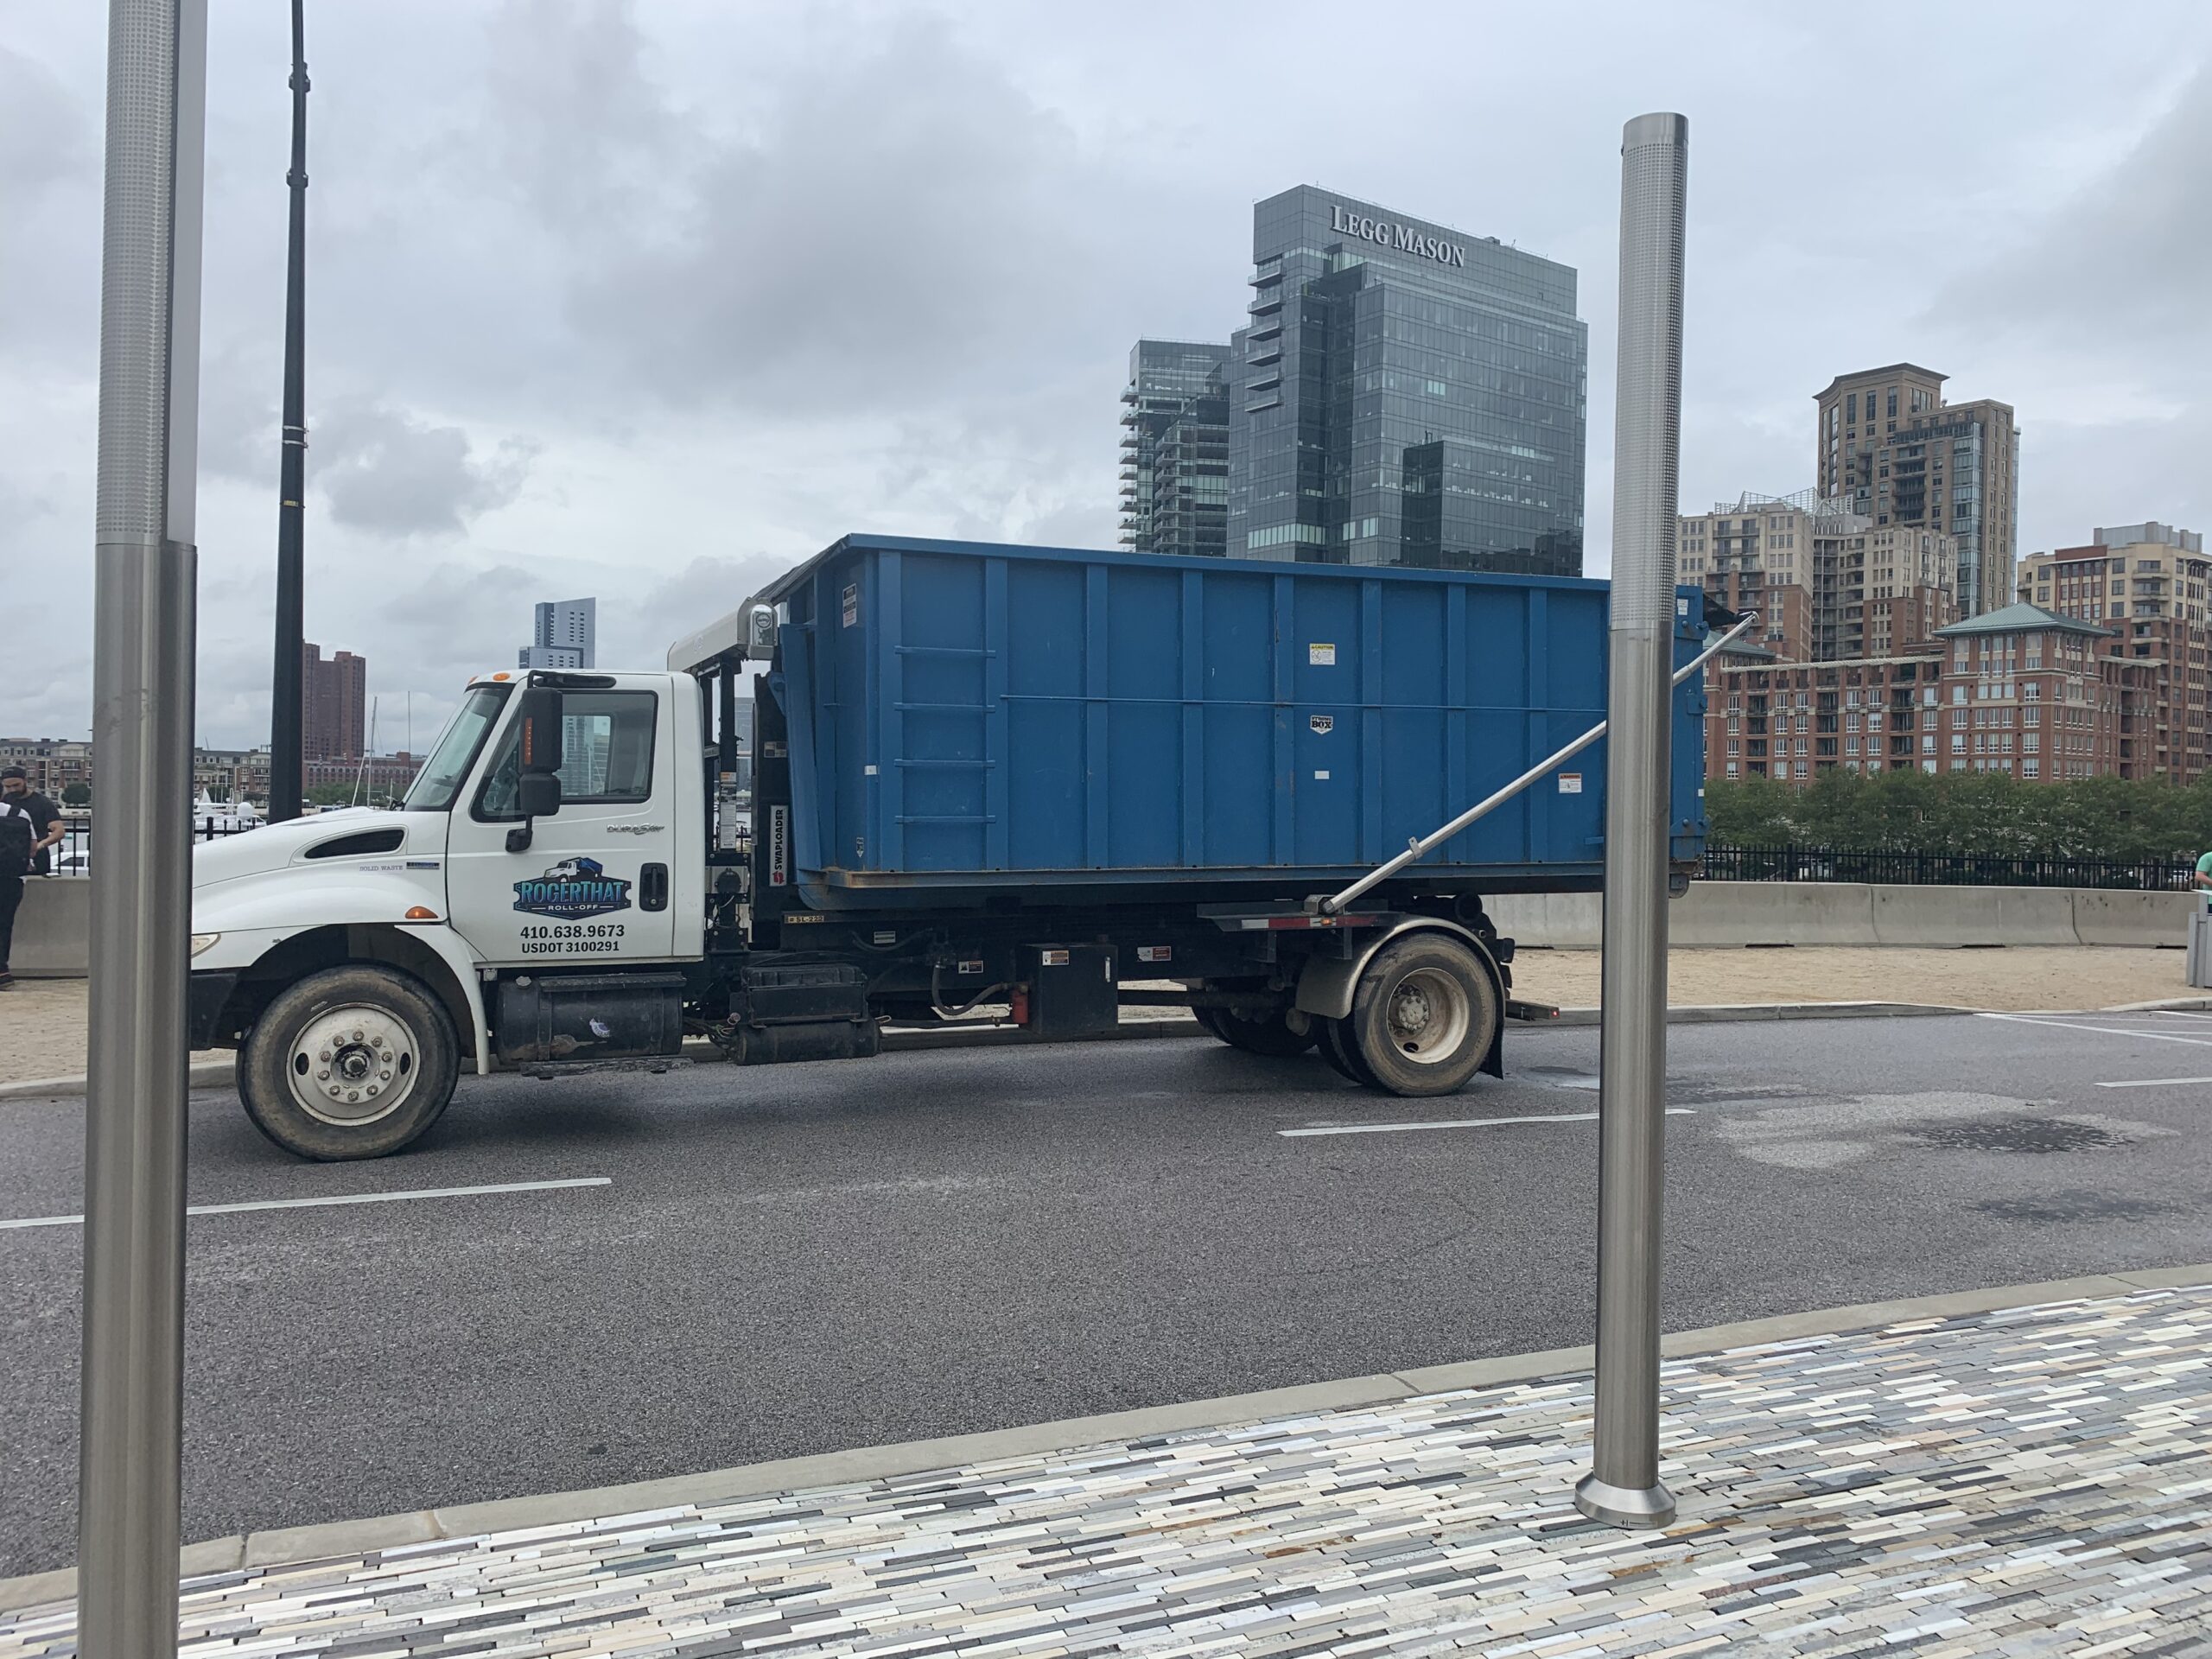 Dumpster being driven to the rental site